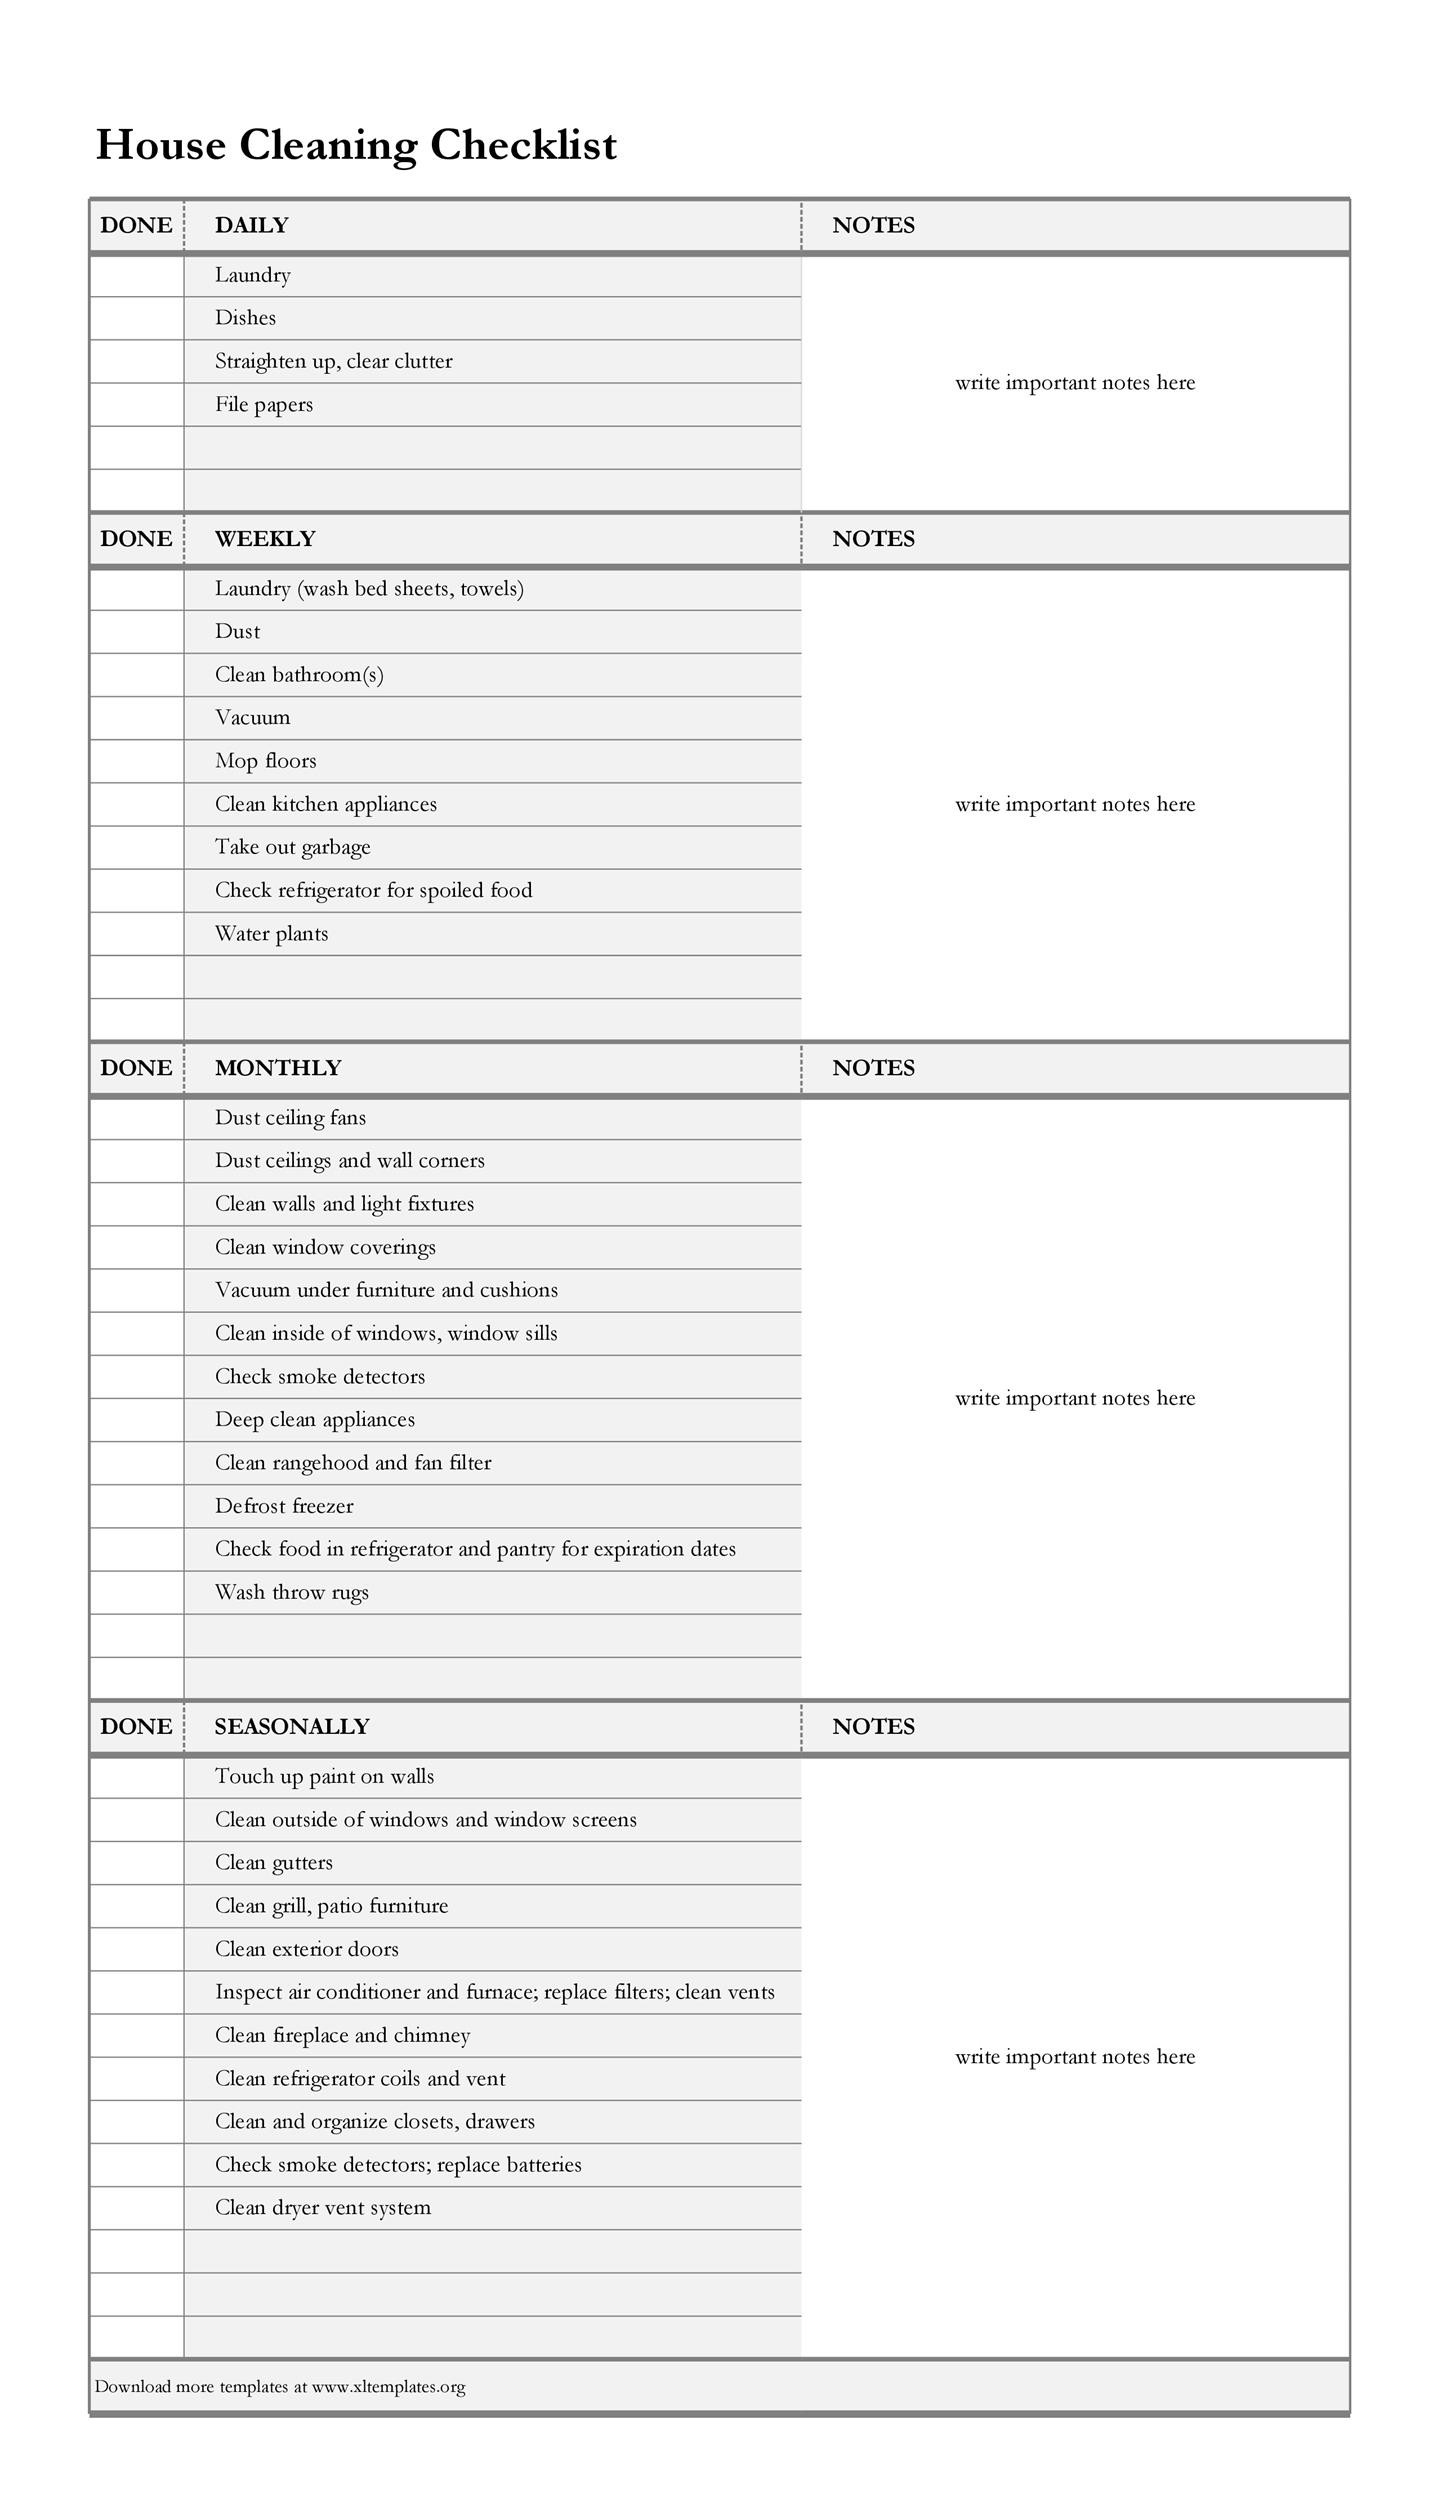 40-printable-house-cleaning-checklist-templates-templatelab